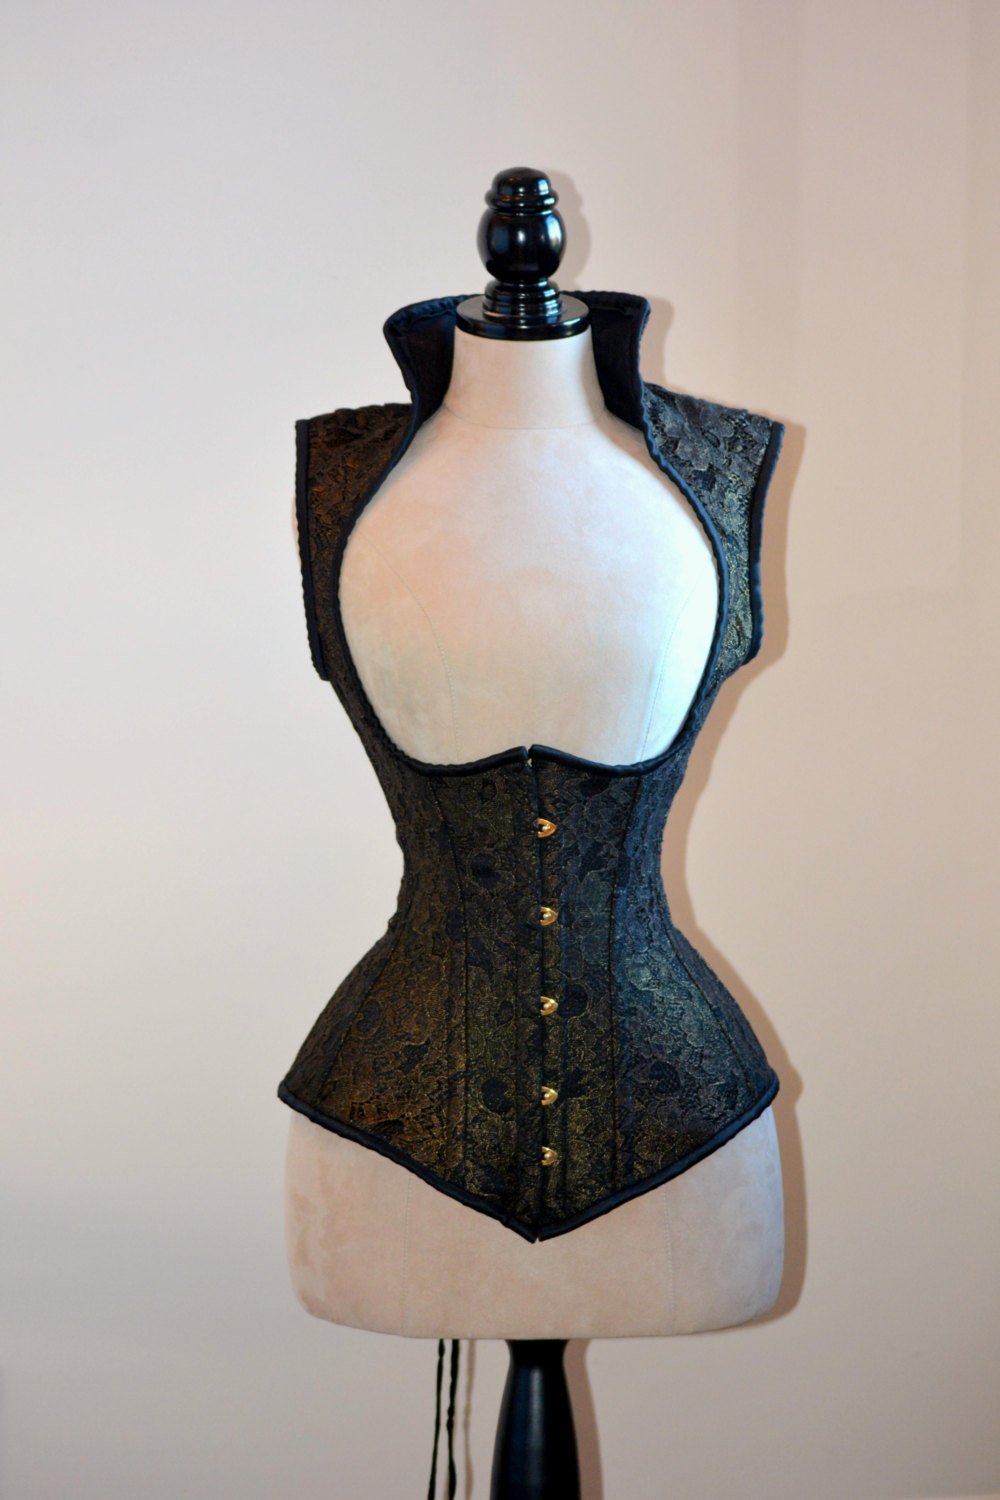 Authentic Steampunk Corsets, 200+ Options